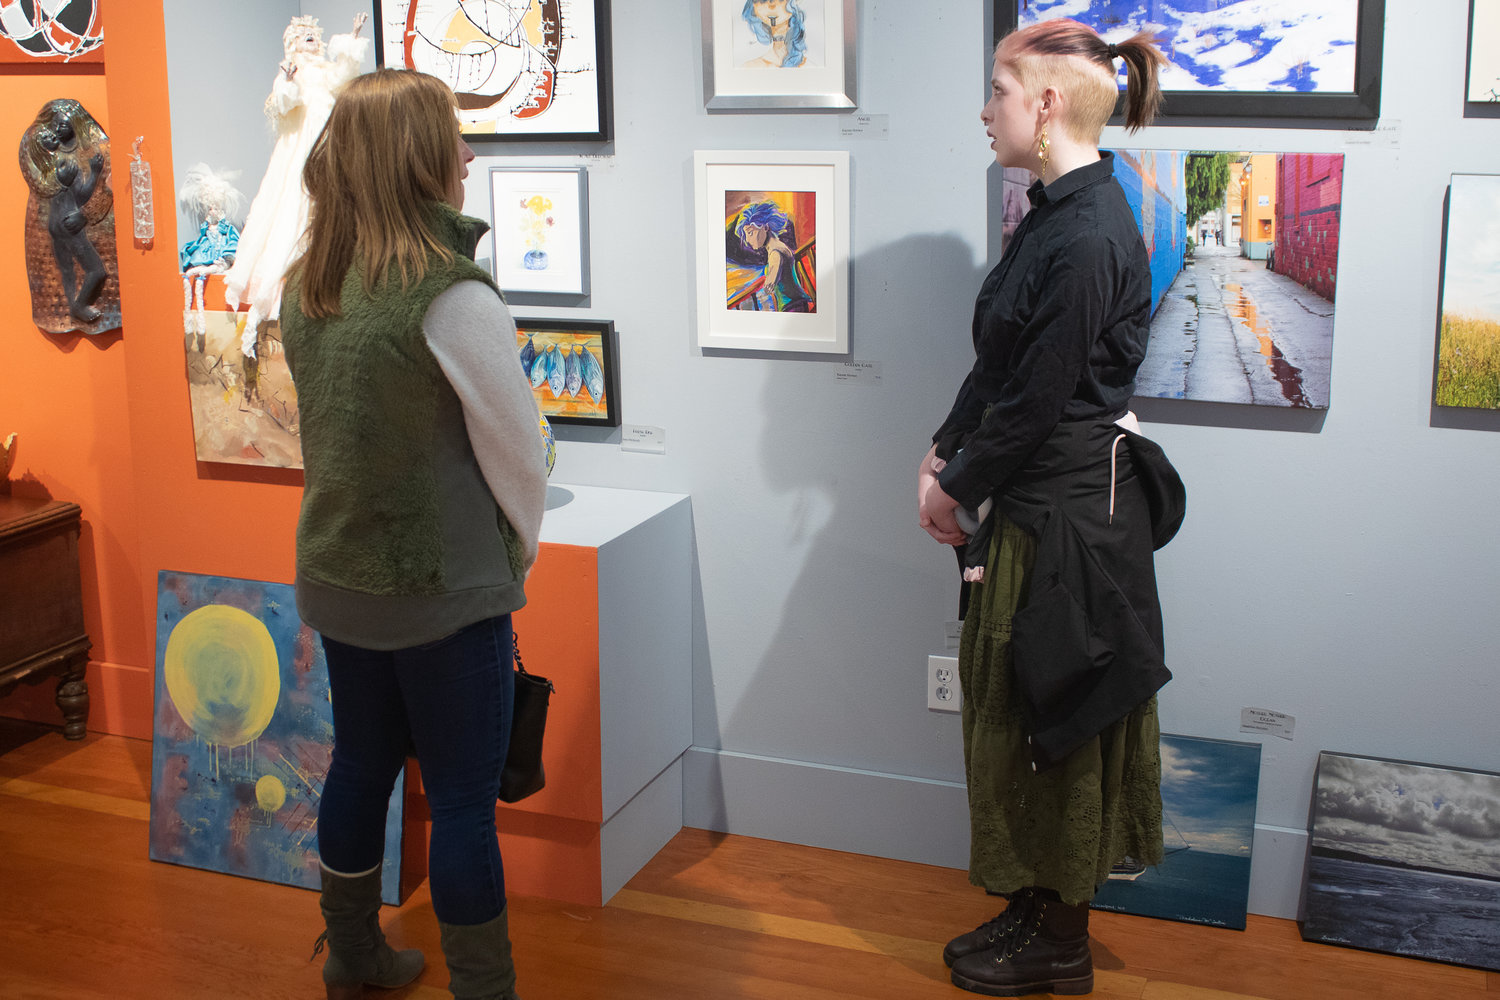 Toledo High School sophomore Kaycee Horrace talks a gallery viewer through her work currently on display for the next month at the Rectangle Gallery & Creative Space.